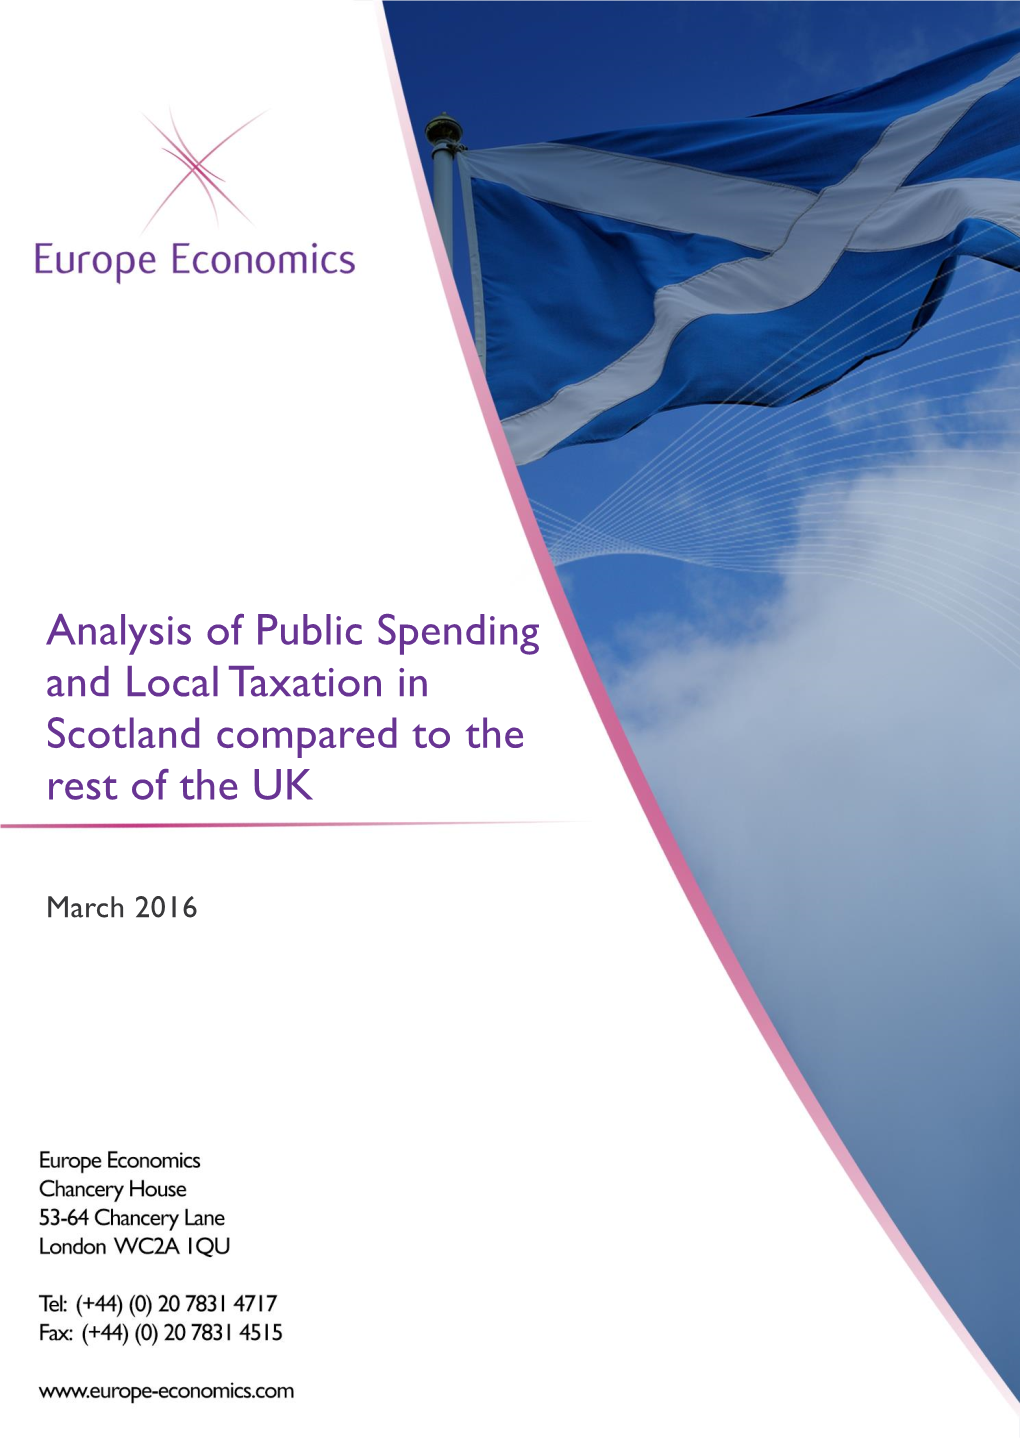 Analysis of Public Spending and Local Taxation in Scotland Compared to the Rest of the UK